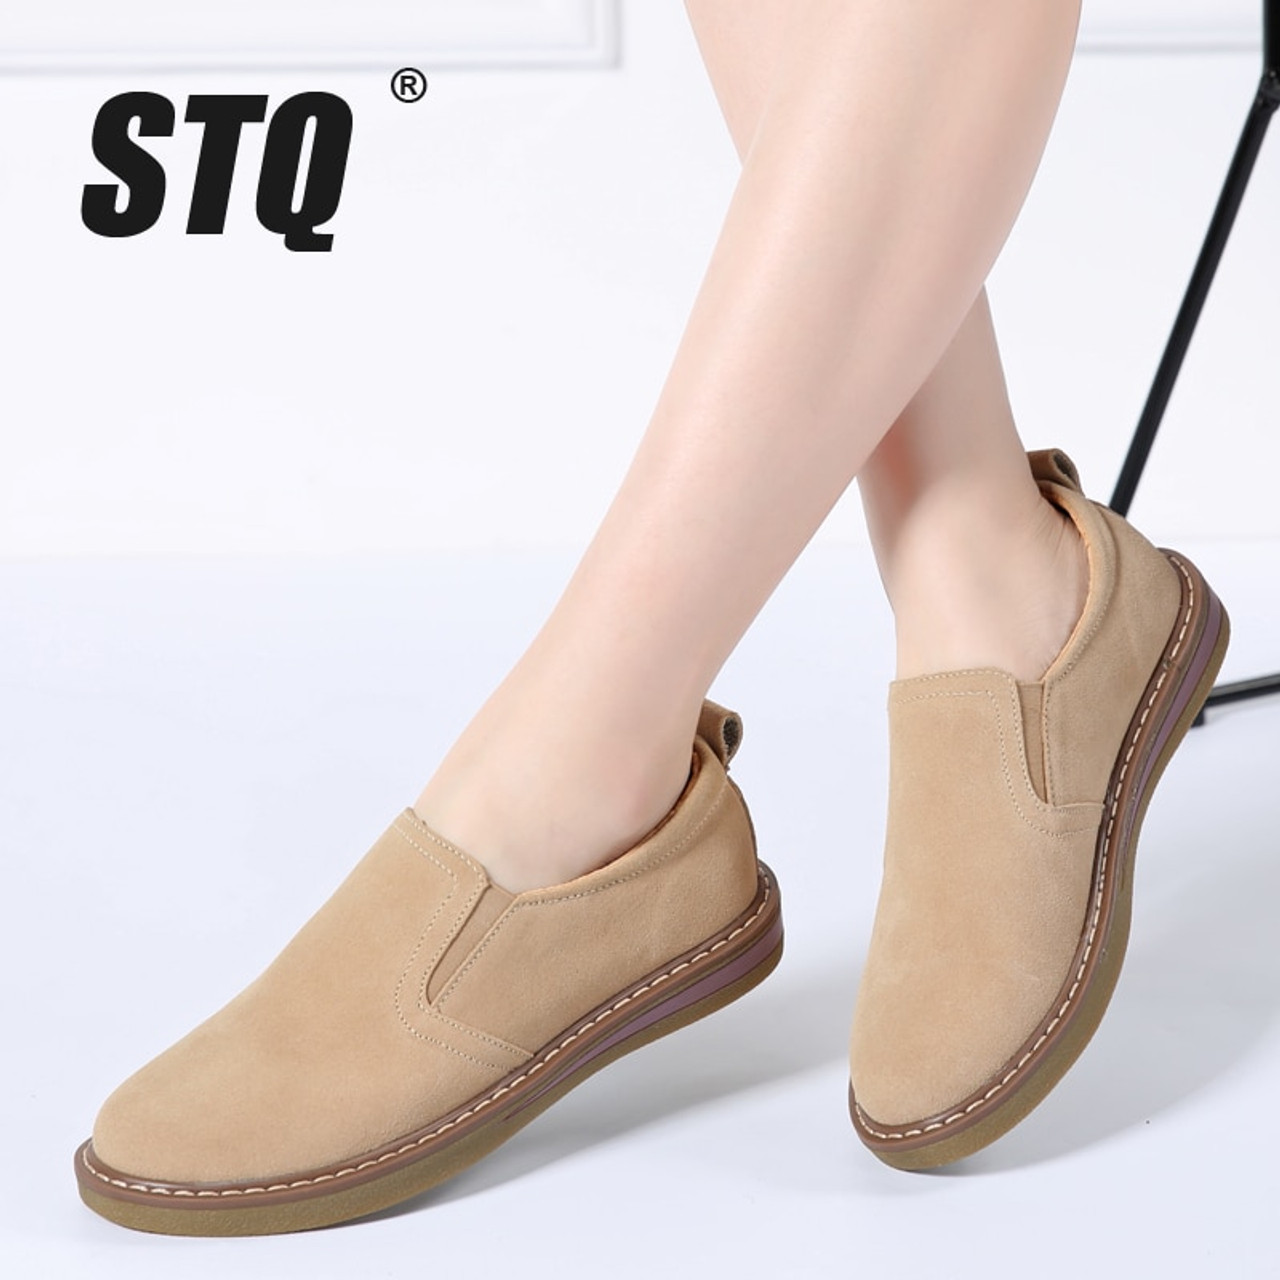 suede slip on shoes womens